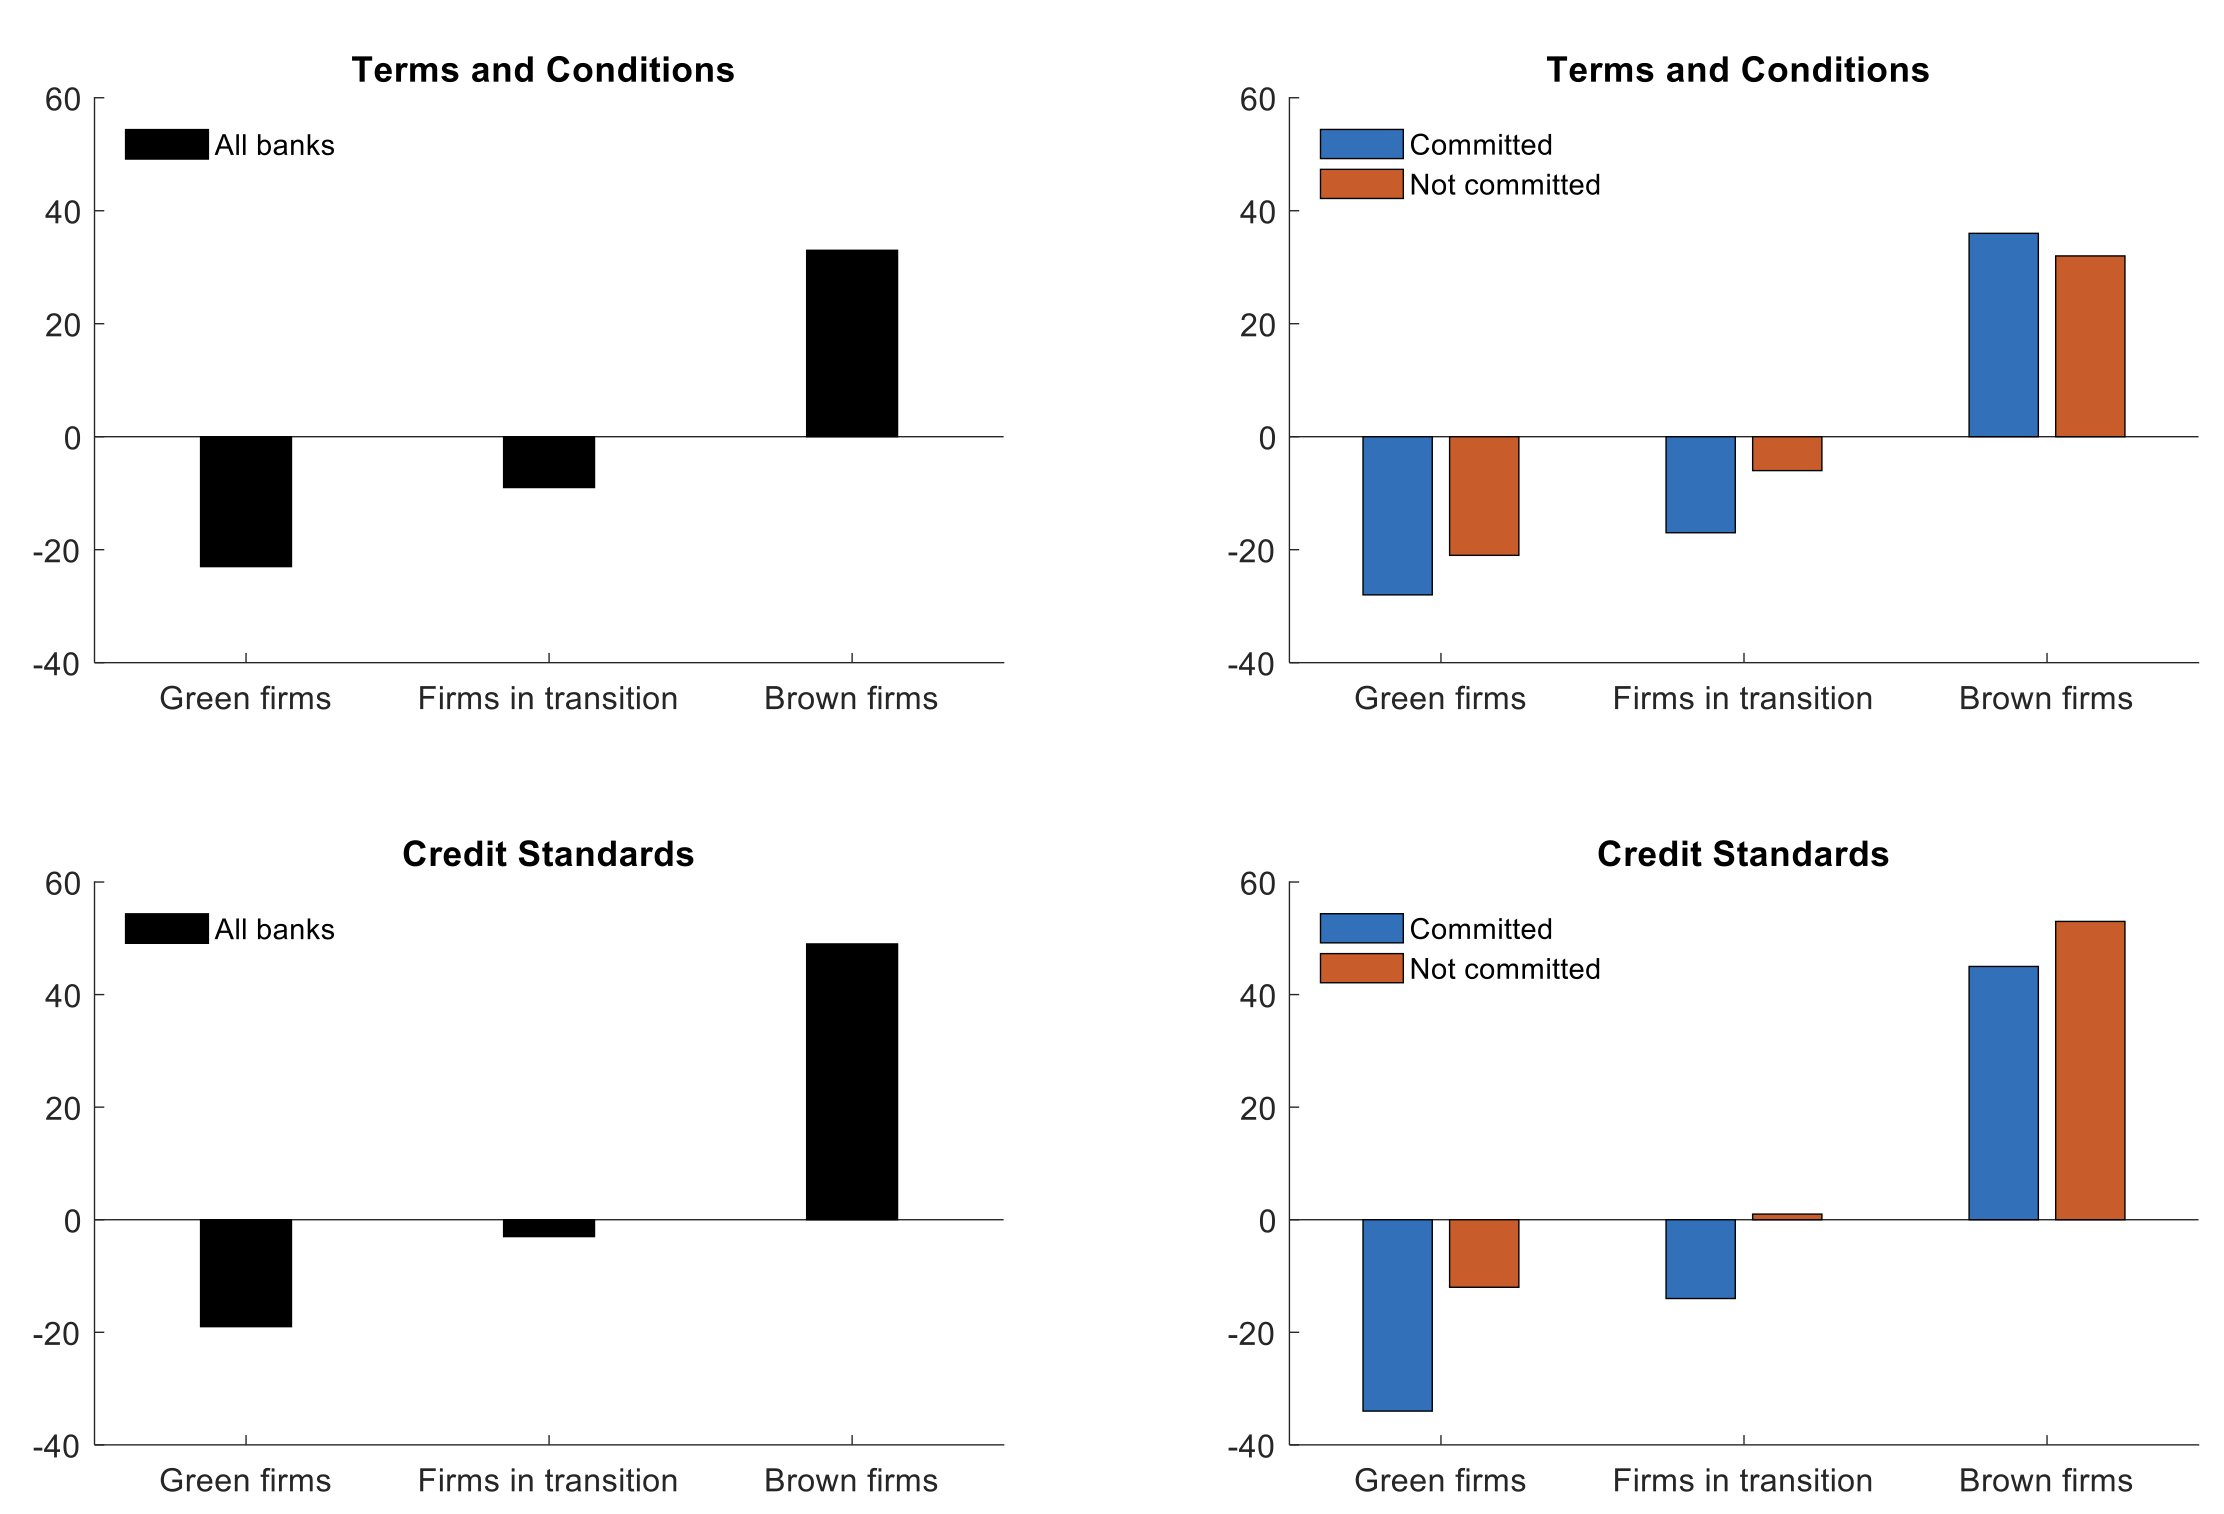 Figure 3 Attitude by banks towards green and brown firms: Survey evidence